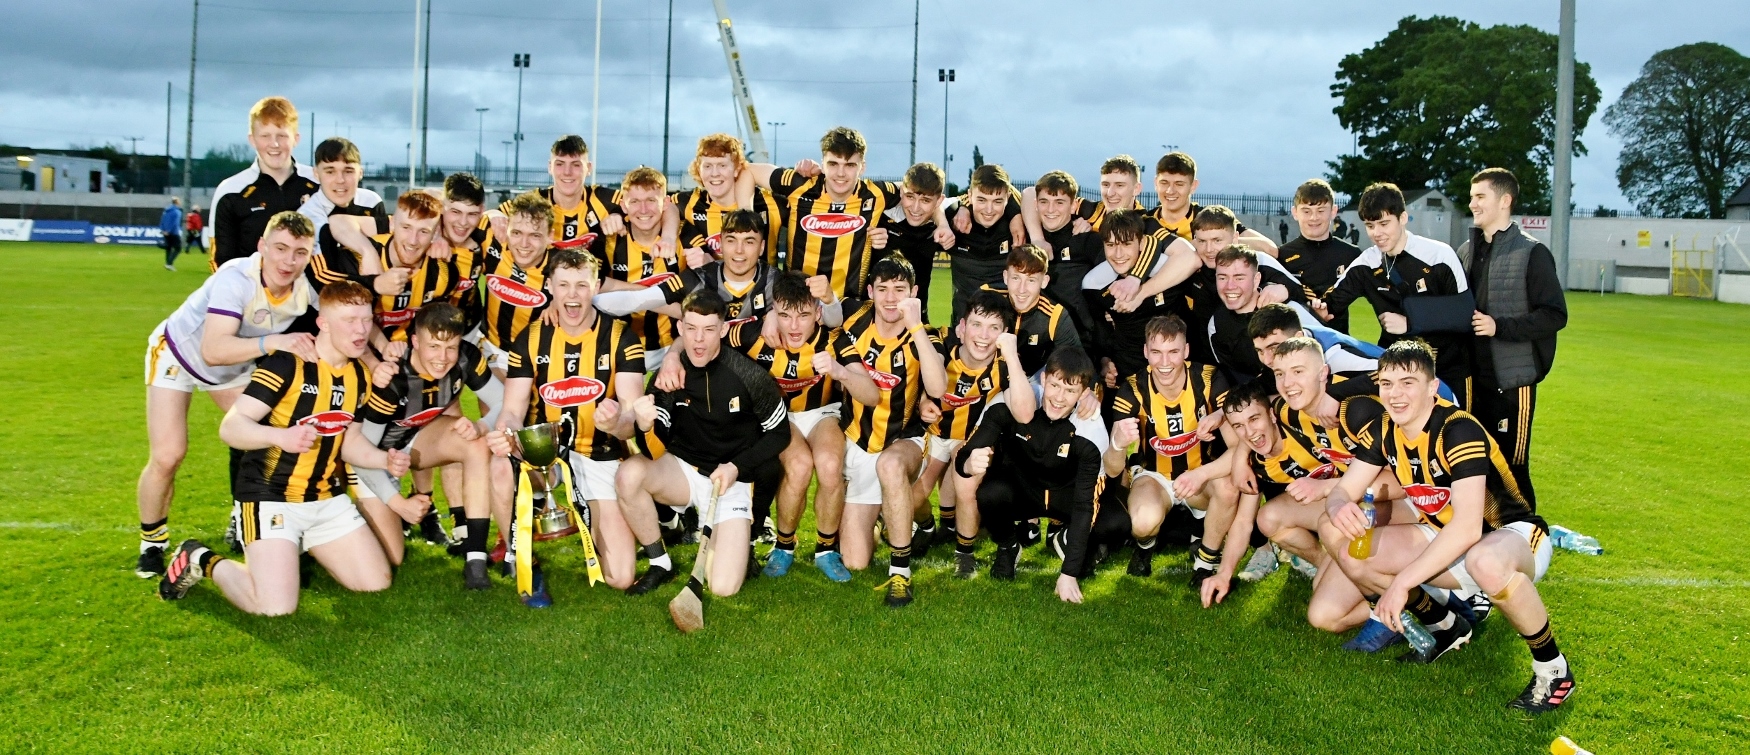 Kilkenny are Leinster U20 Hurling Champions for 2022